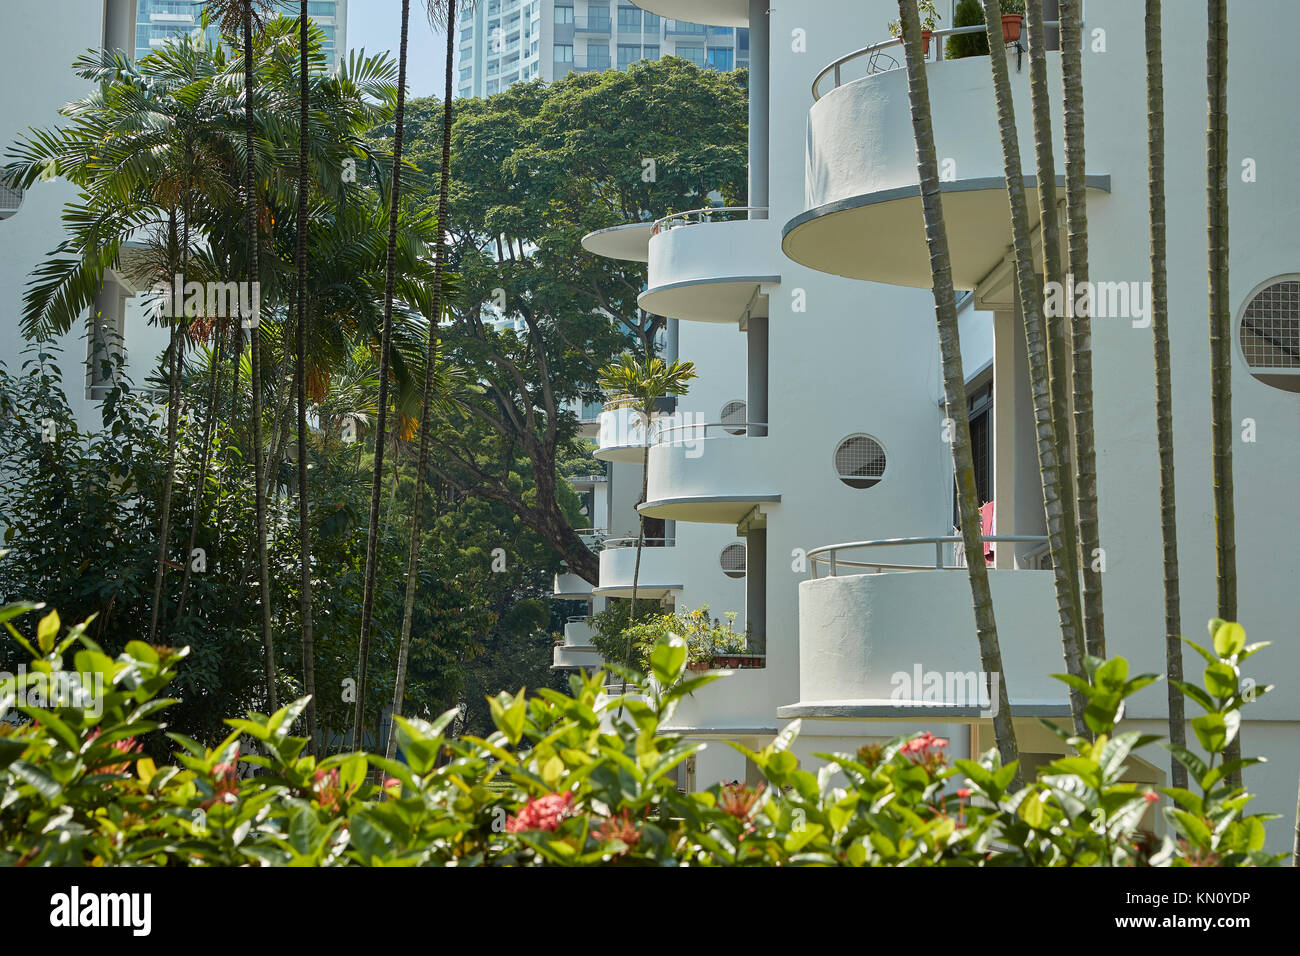 Contrasting Low Rise And High Rise Residental Housing In Tiong Bahru, Singapore. Stock Photo